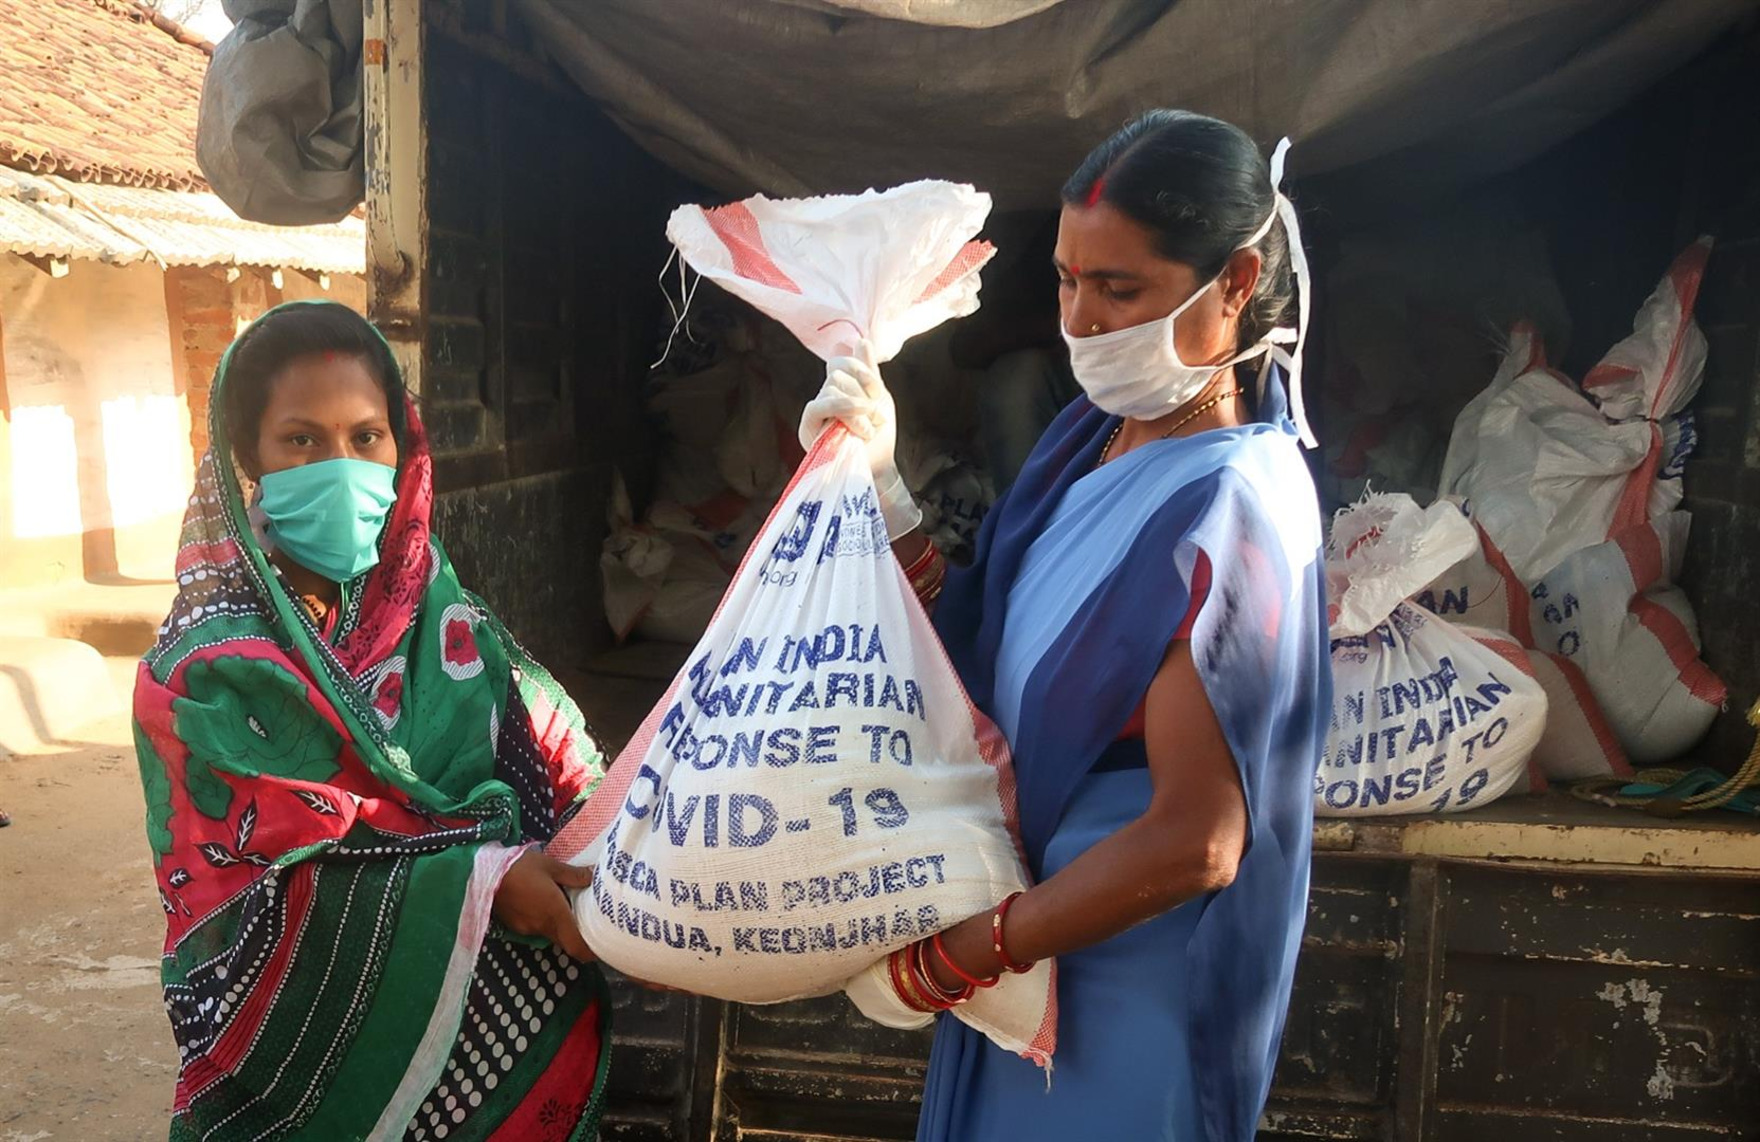 Emergency food for Indian families during pandemic funded by London Freemasons